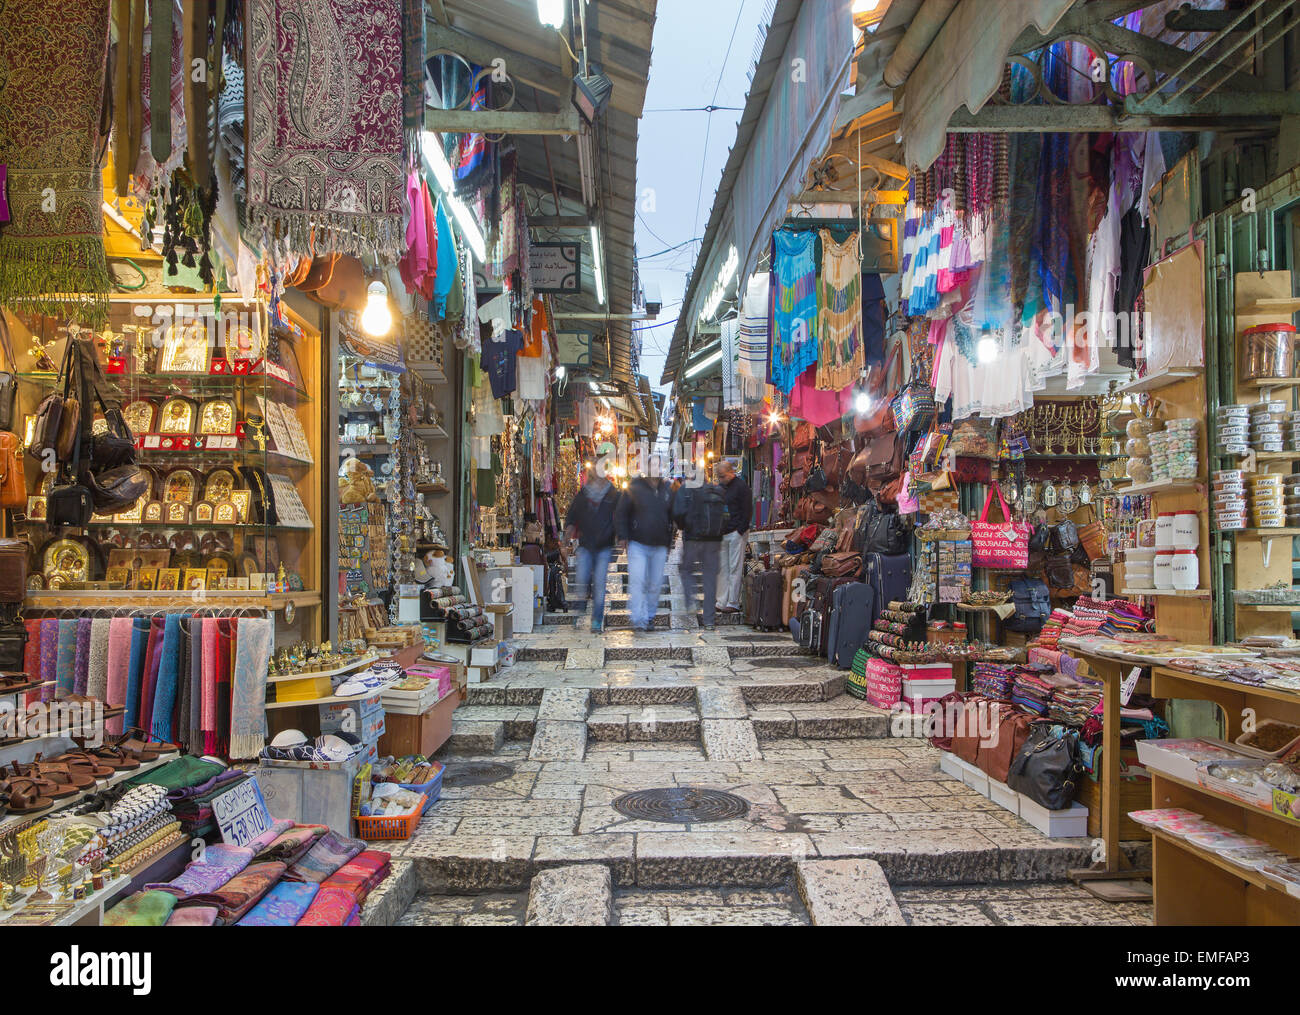 JERUSALEM, ISRAEL - MARCH 3, 2015: The market street in old town at full activity. Stock Photo